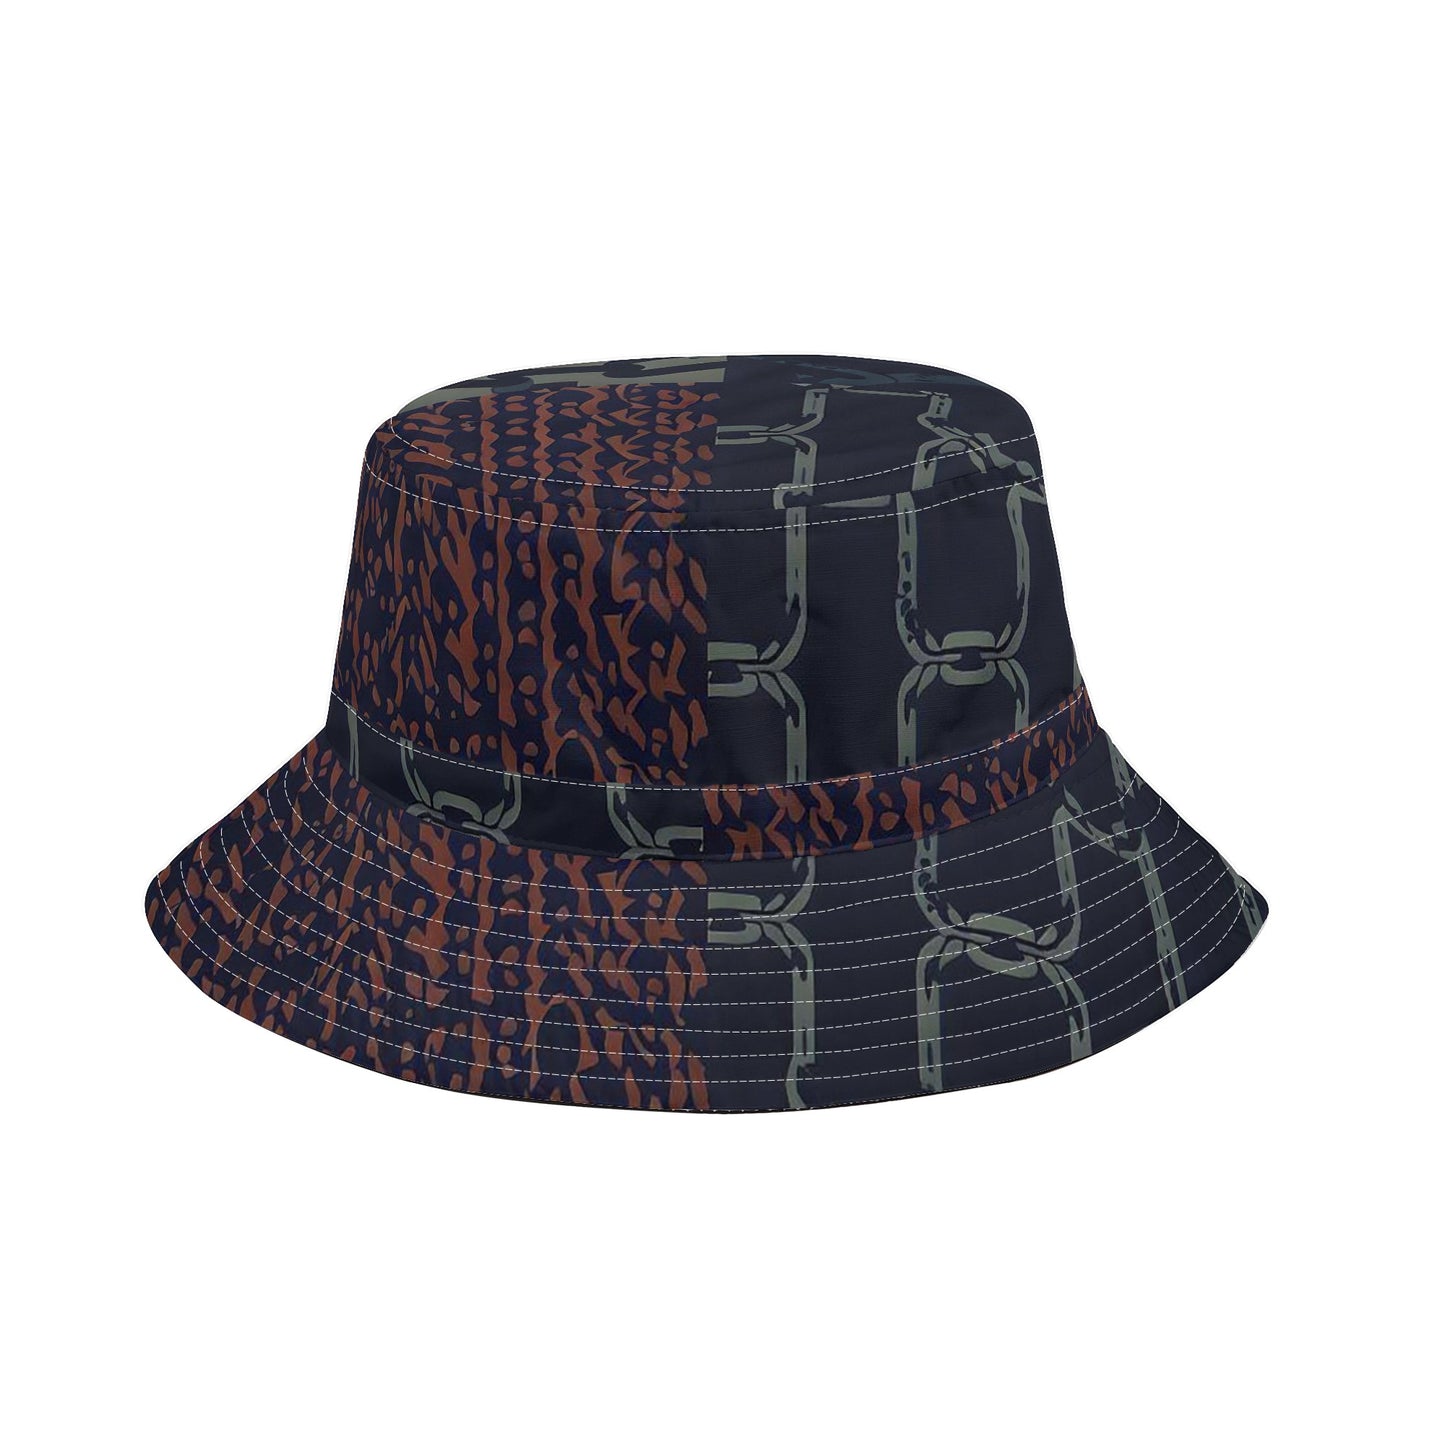 Vampire Art Grunge Unisex Bucket Fisherman's Hat - Chains with Rust Patchwork with Adjustable String